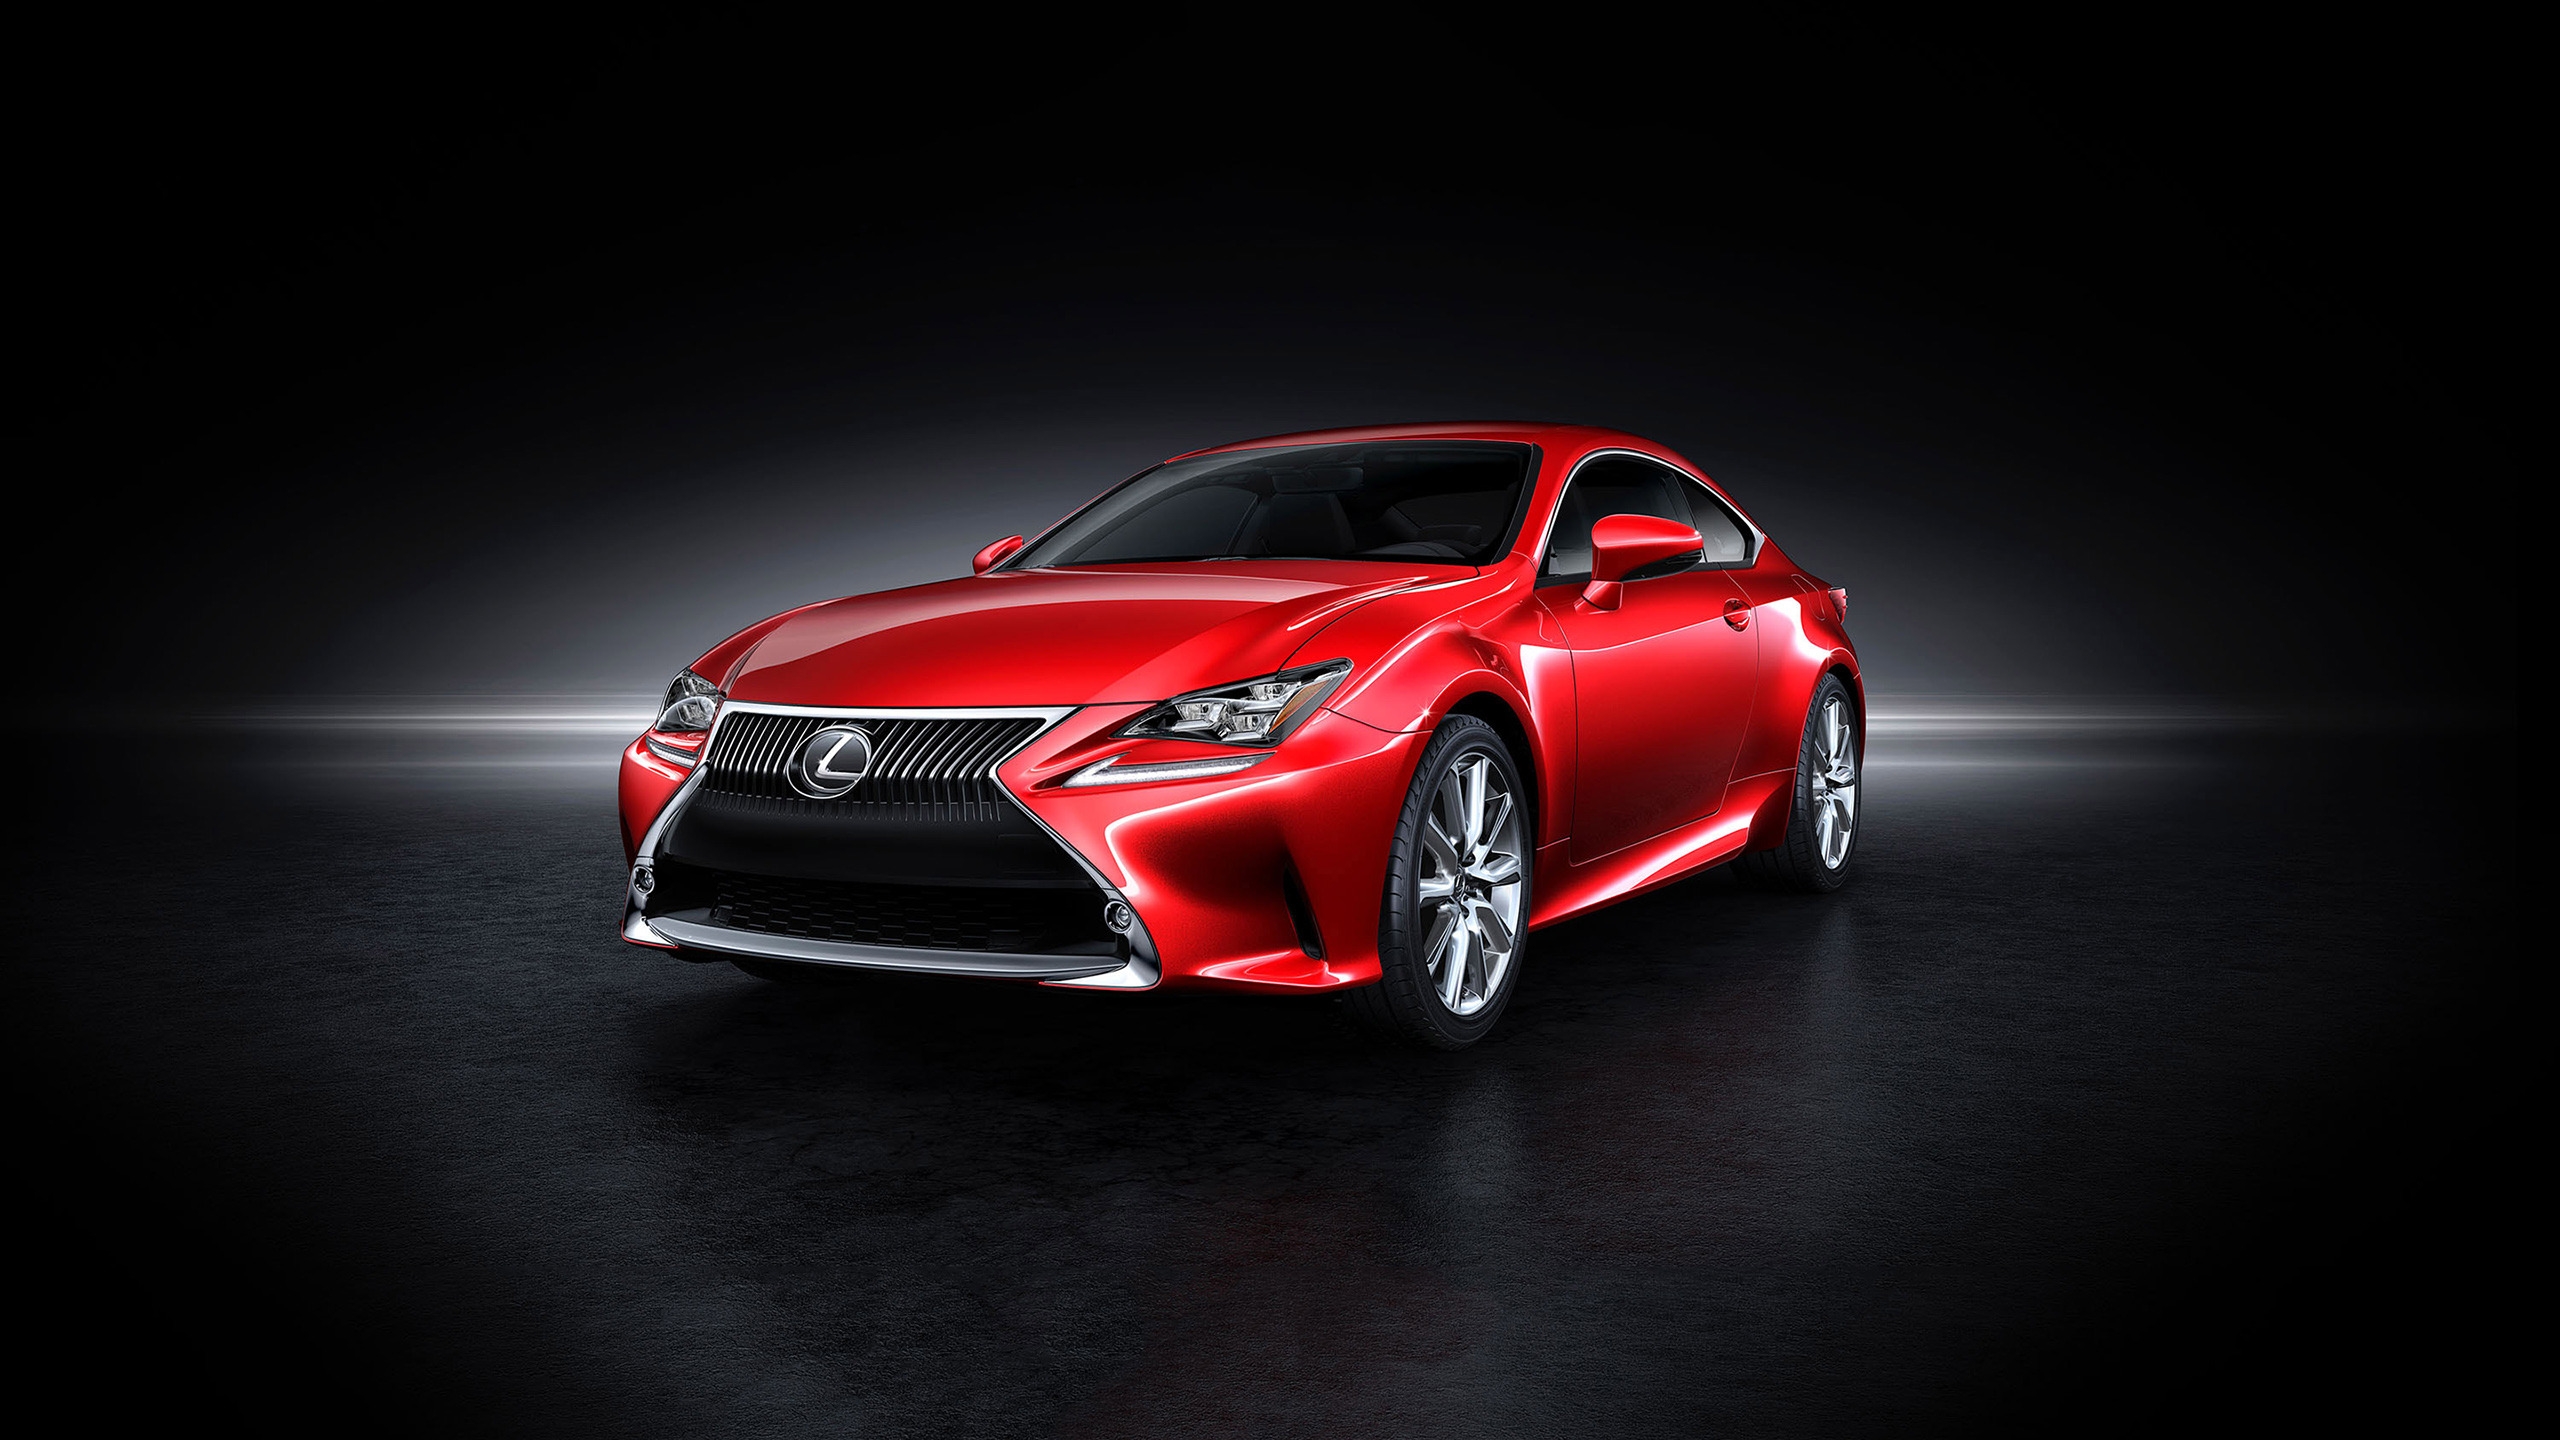 Lexus RC Coupe 2014 for 2560x1440 HDTV resolution